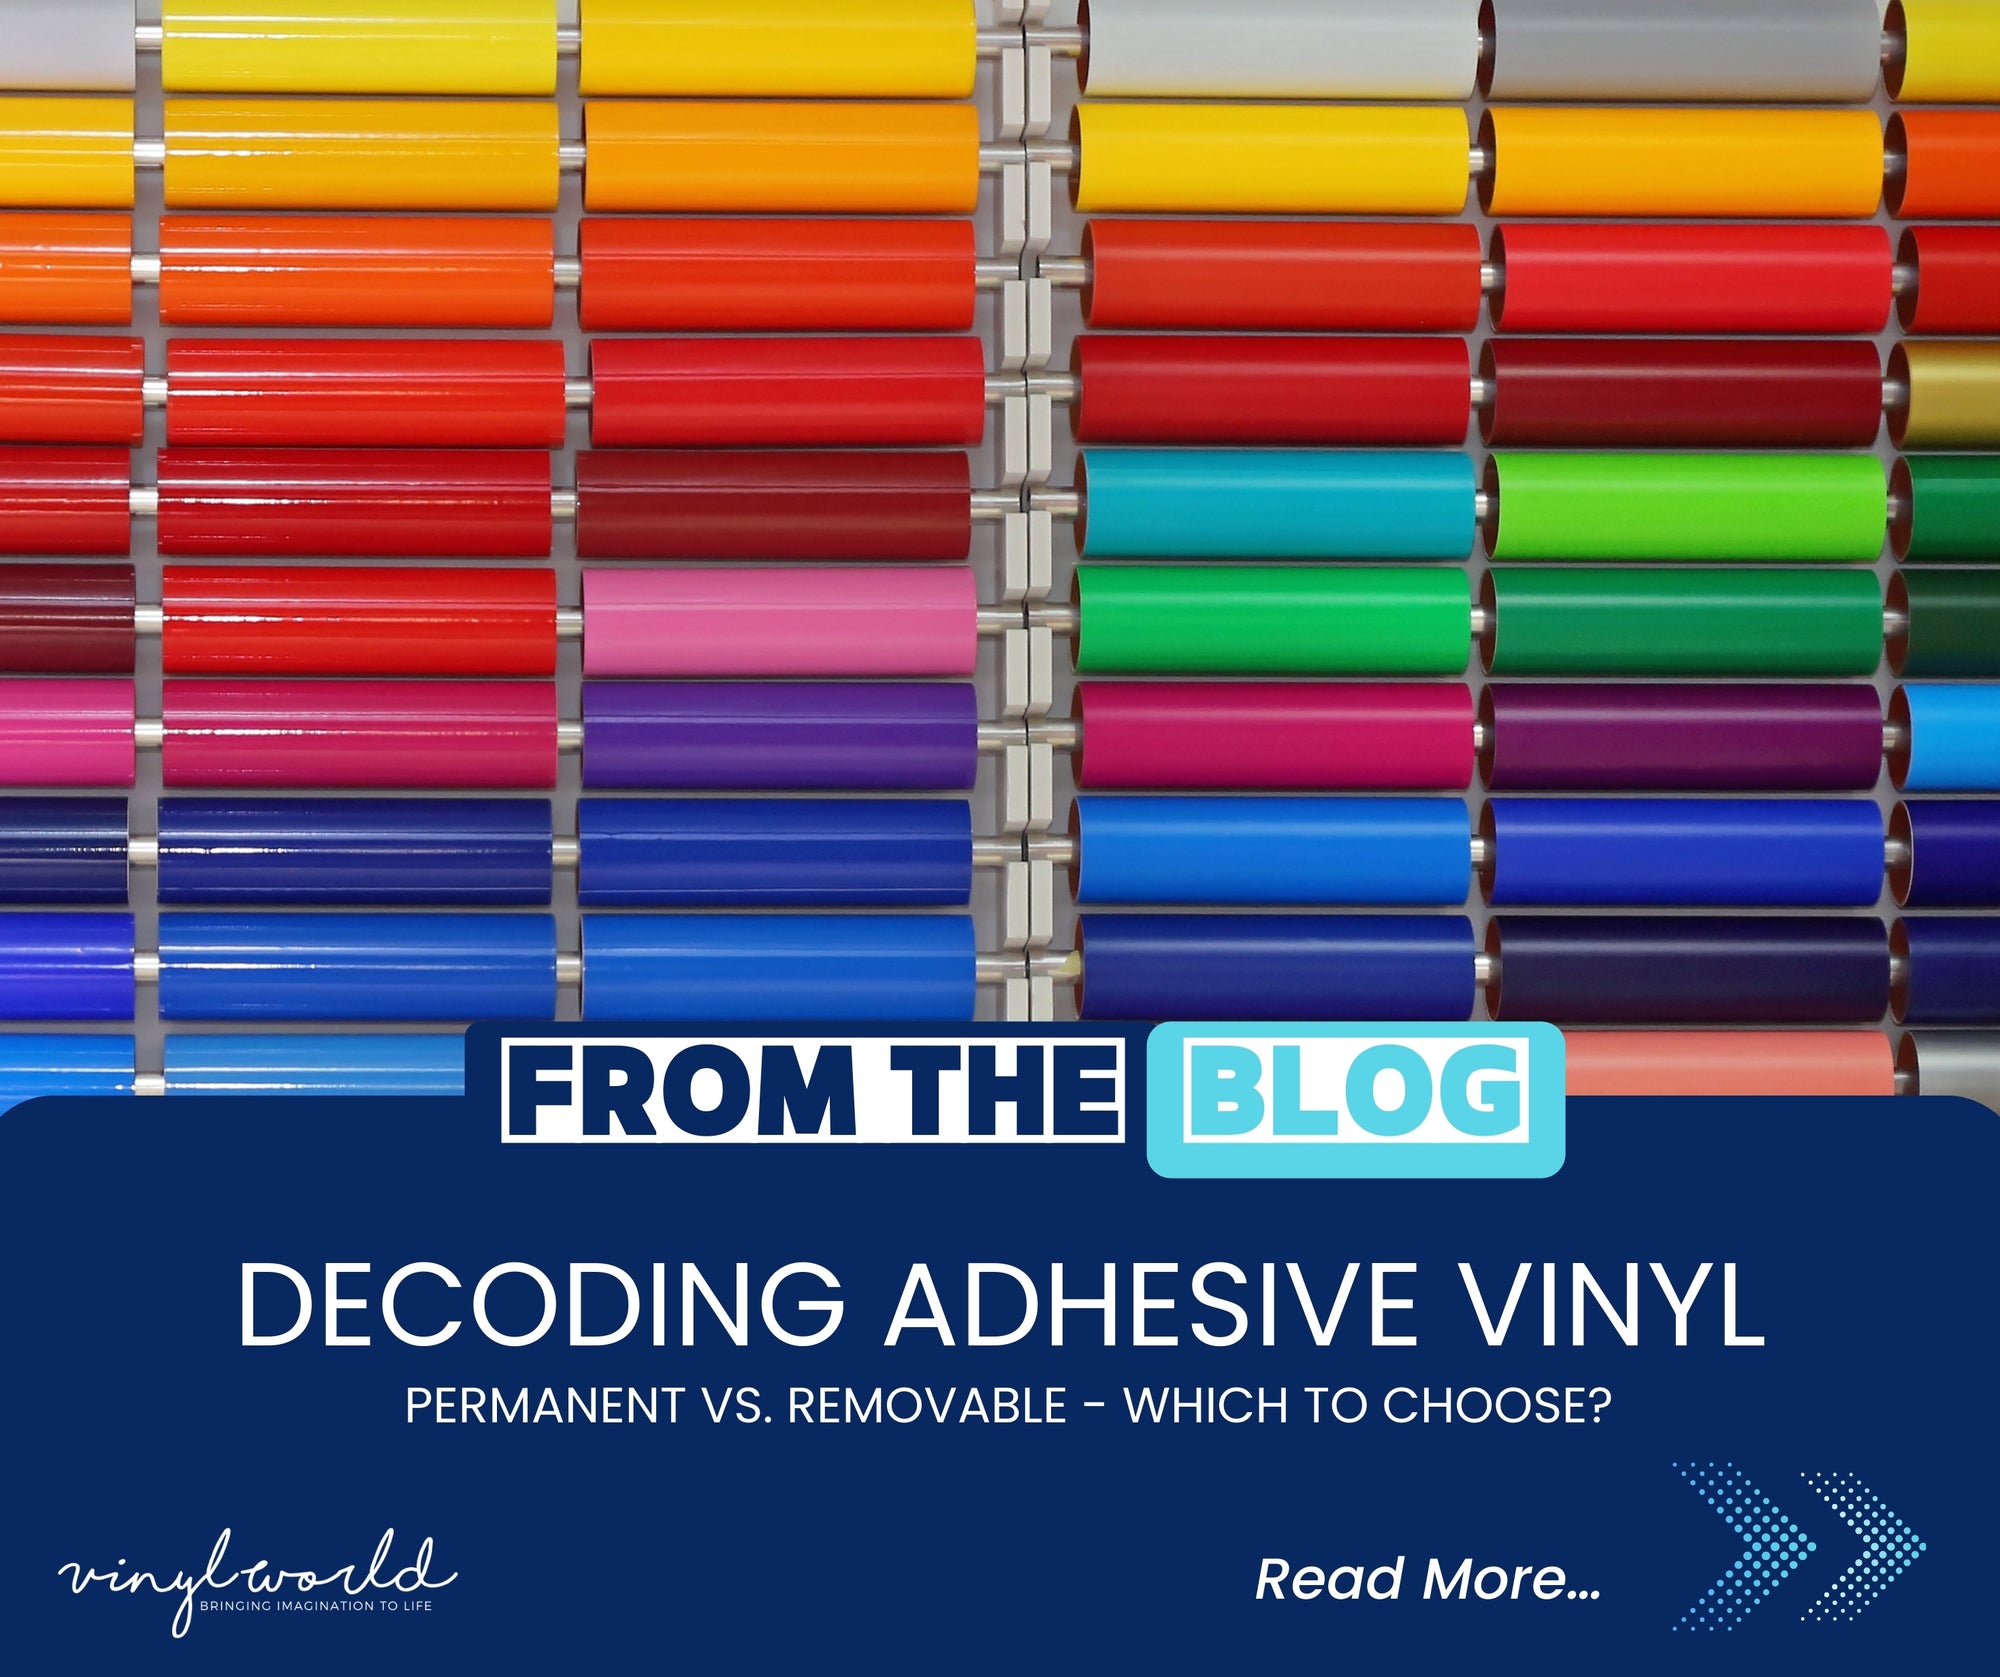 Decoding Adhesive Vinyl: Permanent vs. Removable - Which to Choose?